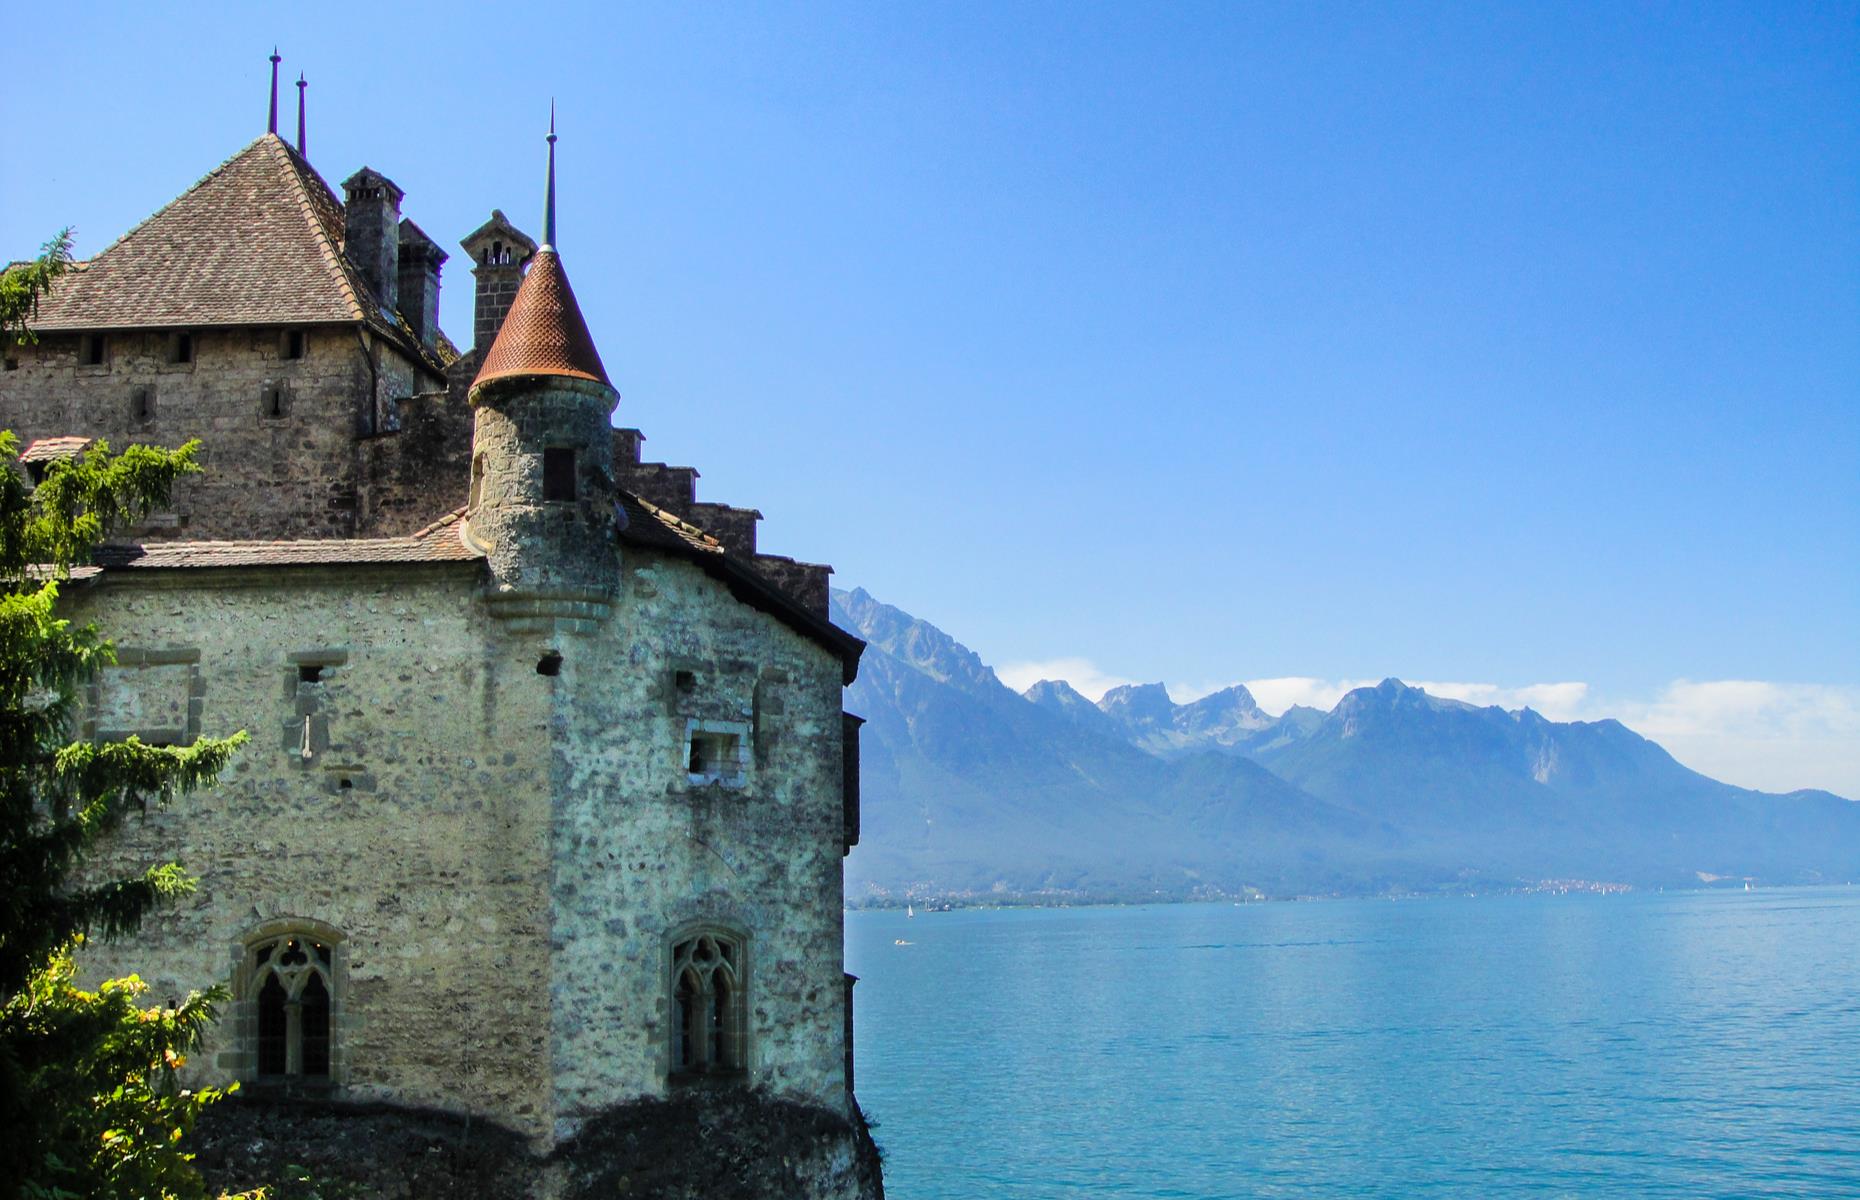 <p>Sat on a rocky isle on the banks of Lake Geneva in the shadow of the mountains, Château de Chillon has an ethereal setting and it wouldn’t seem unfeasible to see a mermaid emerging from the pretty blue waters that surround it. It was the setting of this handsome fortress that fired the imagination of the animators creating Eric’s castle in <em>The Little Mermaid</em>. Just near Montreux, it’s Switzerland’s most visited historic site today.</p>  <p><a href="https://www.loveexploring.com/galleries/109255/the-worlds-most-popular-movie-locations?page=1"><strong>Now discover the world's most popular movie locations</strong></a></p>